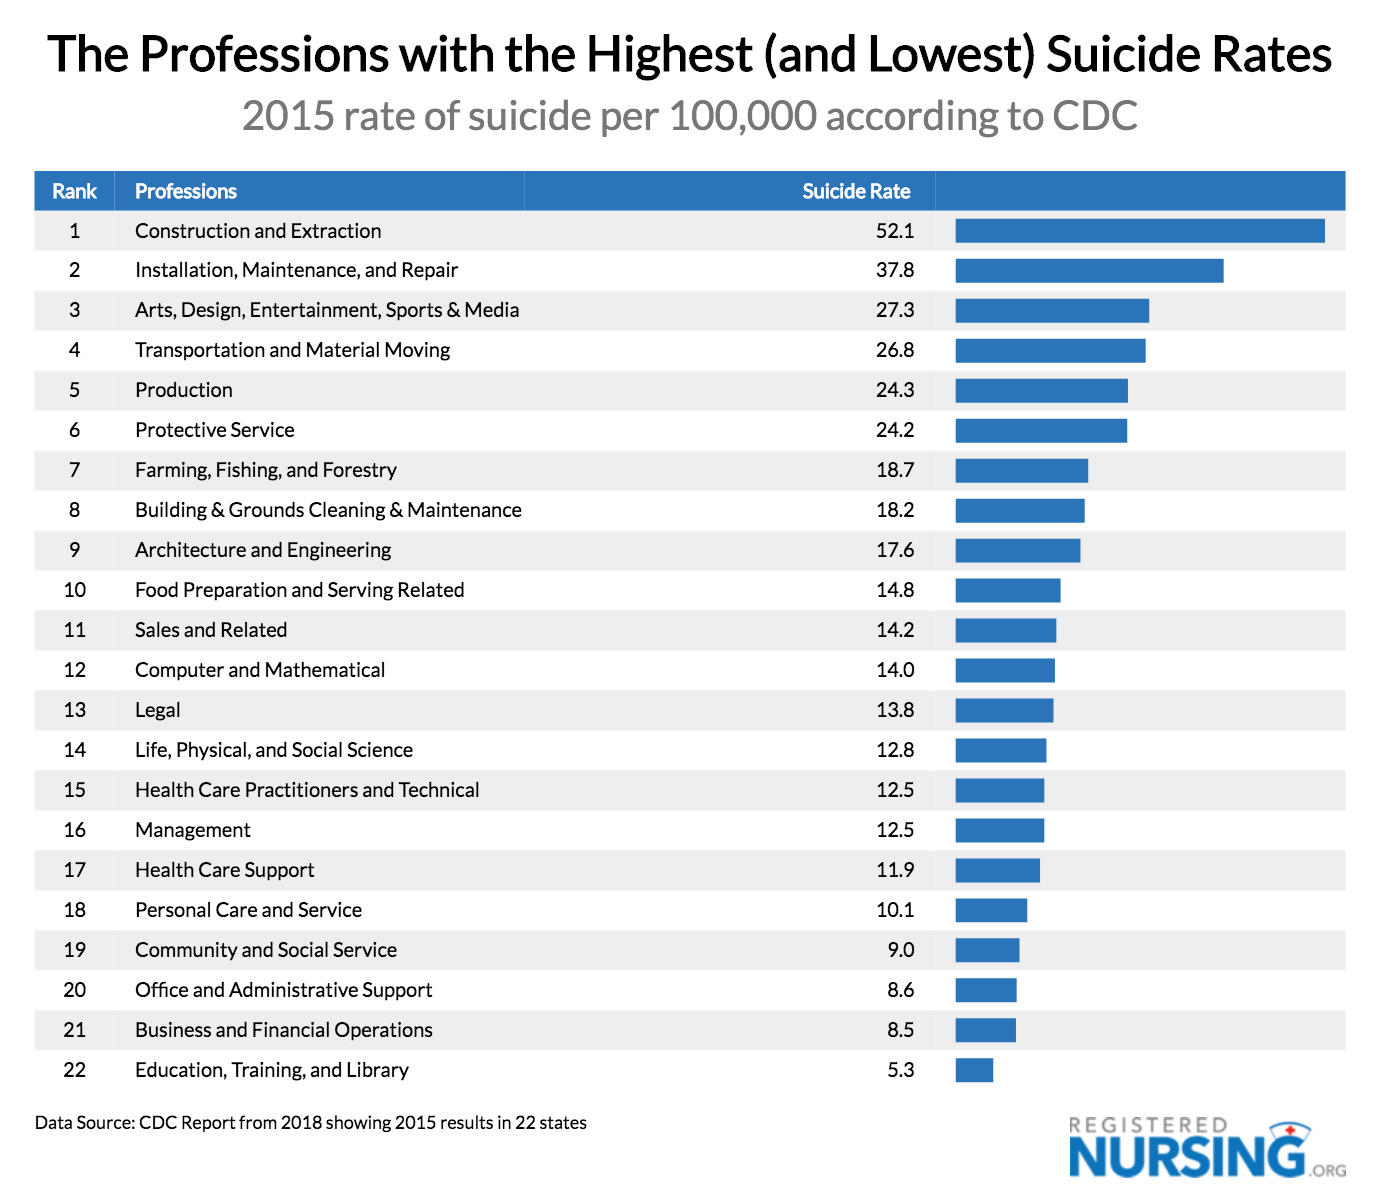 Highest & Lowest Suicide Rates by Profession